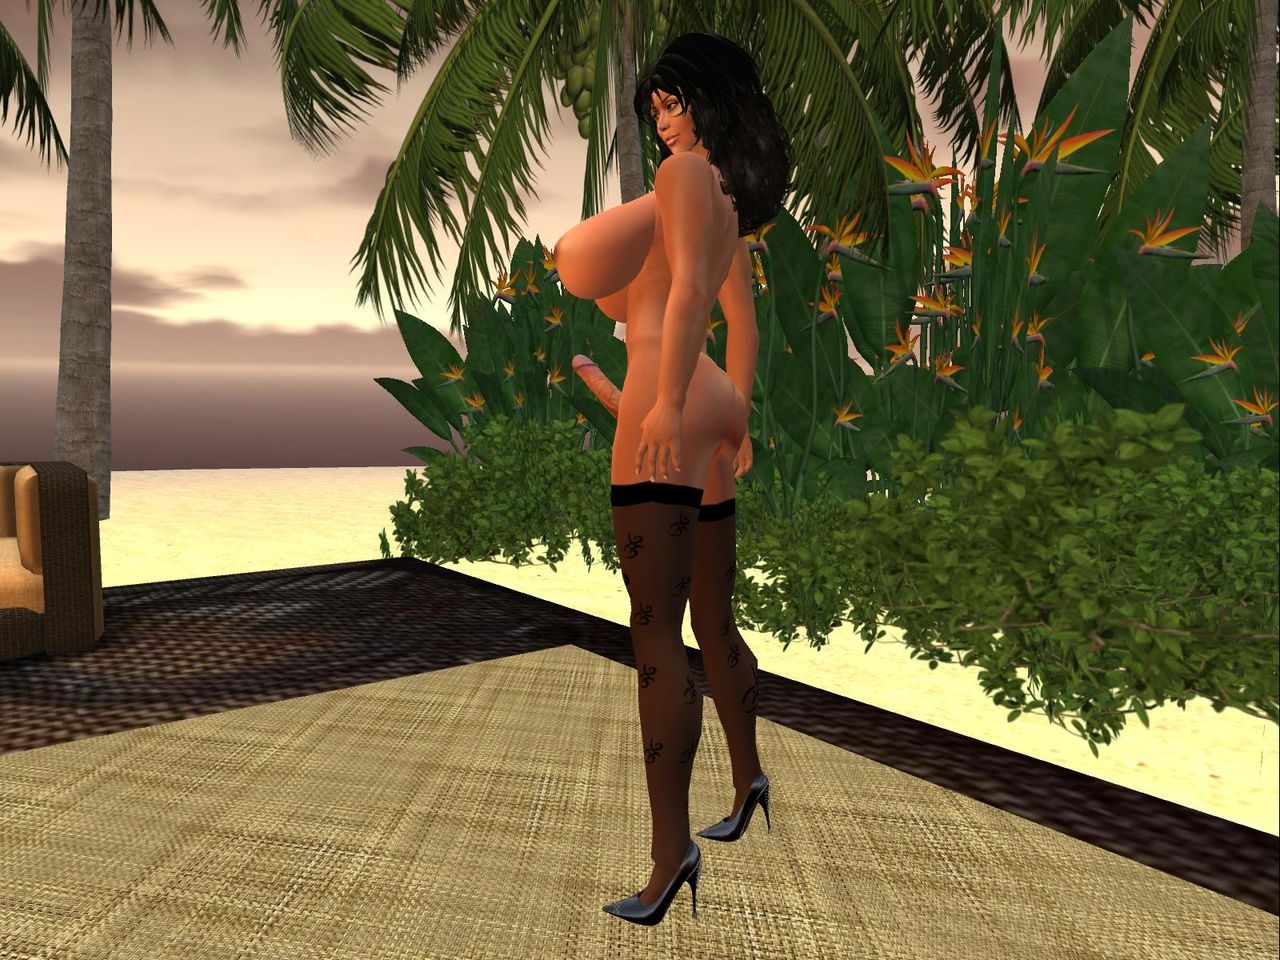 Shemale Luvi poses in Second Life 18